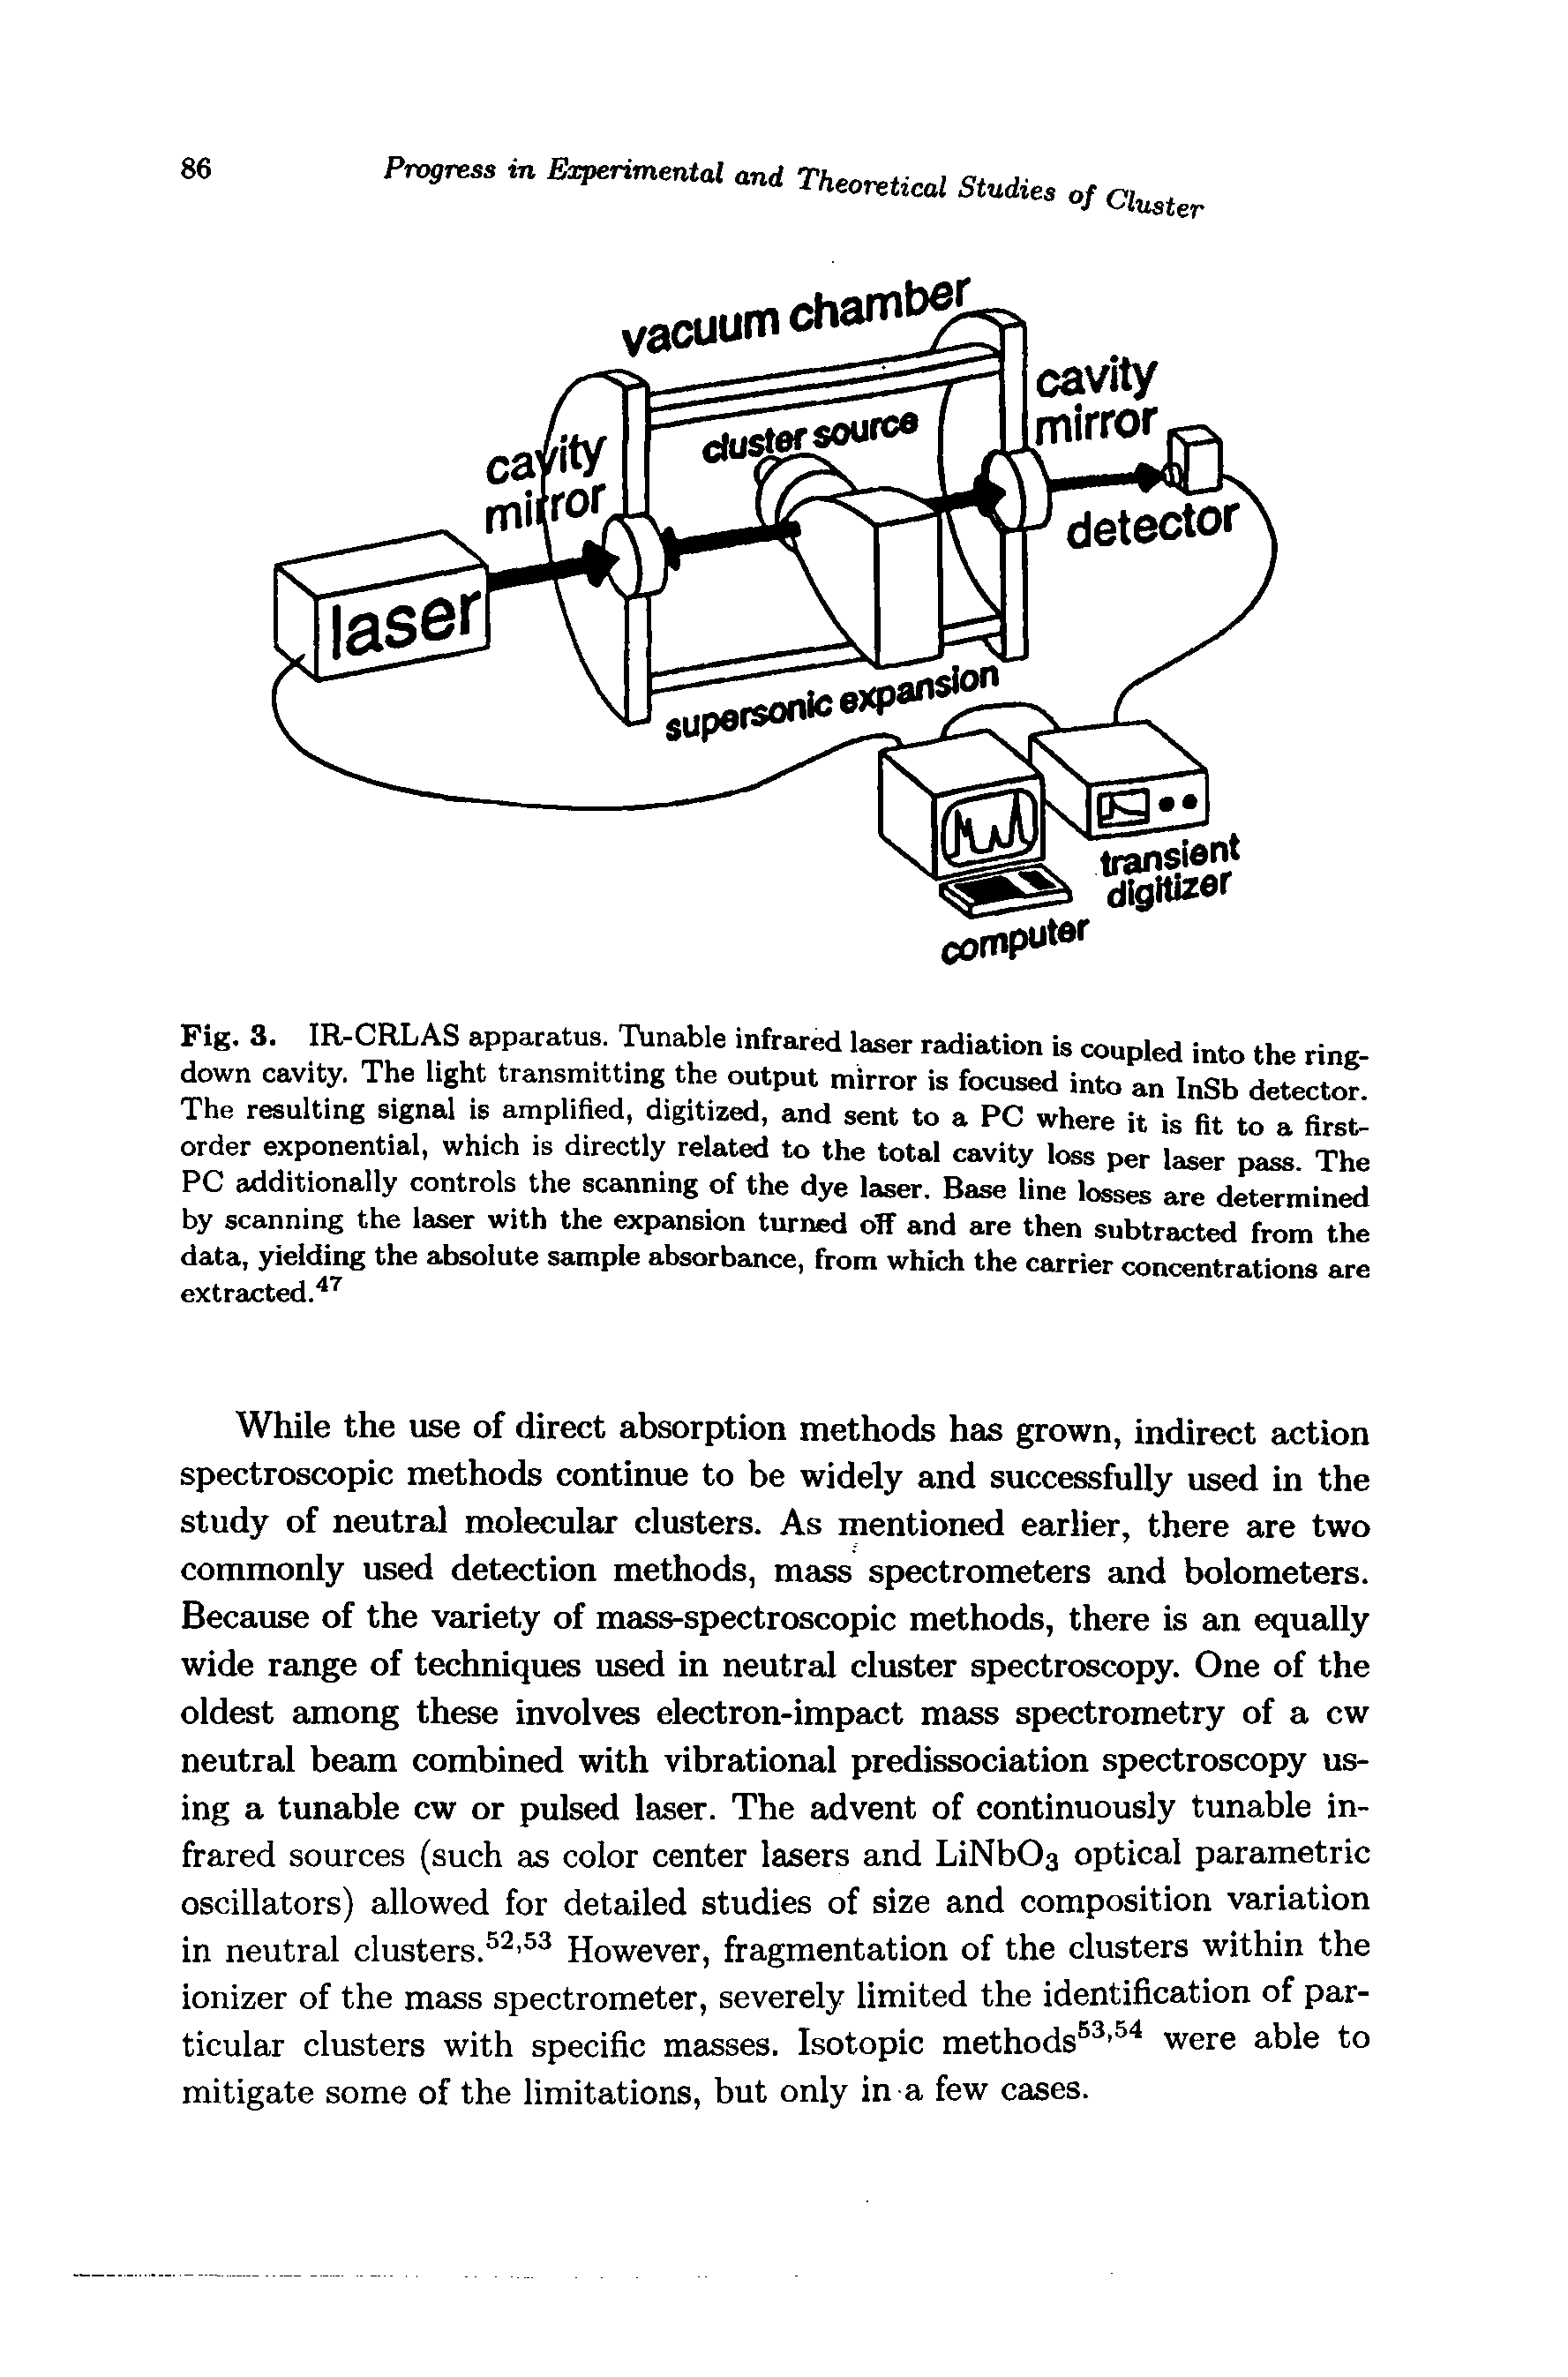 Fig. 3. IB CRLAS apparatus, nable infrared laser radiation U coupled into the ring-down cavity. The light transmitting the output mirror is focused into an InSb detector. The resulting signal is amplified, digitized, and sent to a PC where it is fit to a firsi order exponential, which is directly related to the total cavity loss per laser pass. The PC additionally controls the scanning of the dye laser. Base line losses are determined by scanning the laser with the expansion turned off and are then subtracted from the data, yielding the absolute sample absorbance, from which the carrier concentrations are extracted." ...